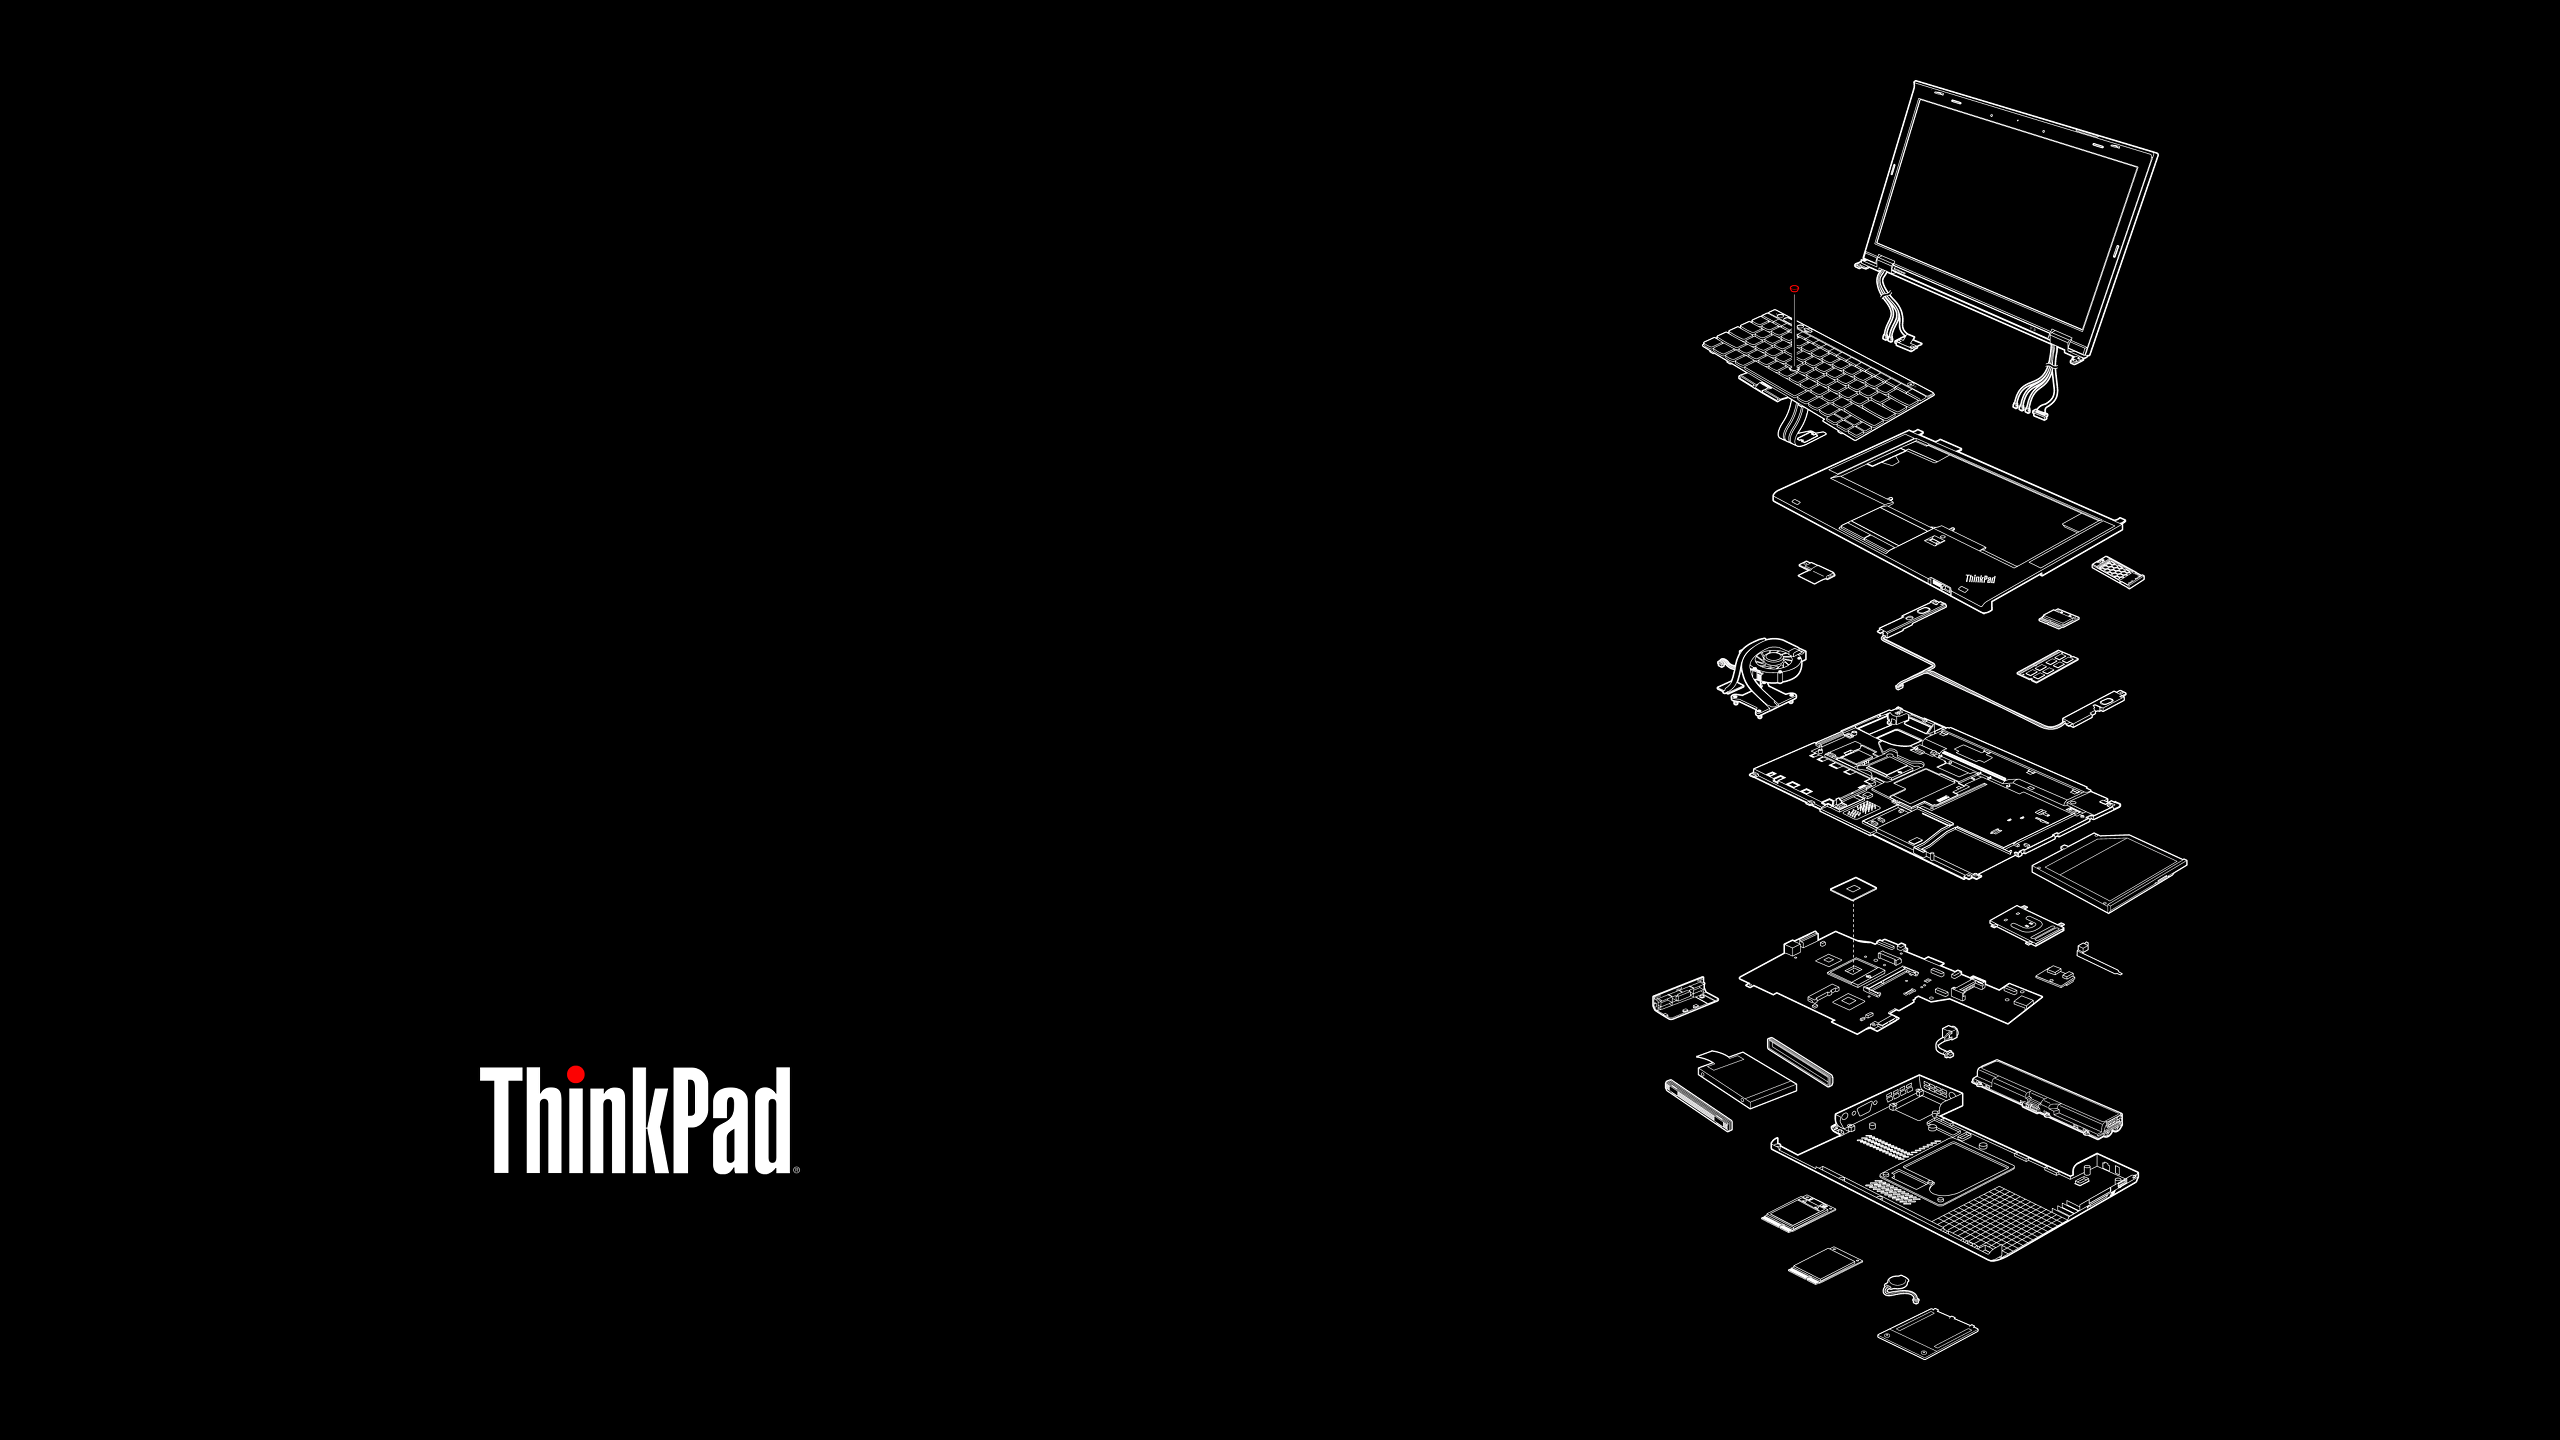 General 2560x1440 minimalism simple background technology black background ThinkPad brand exploded-view diagram laptop